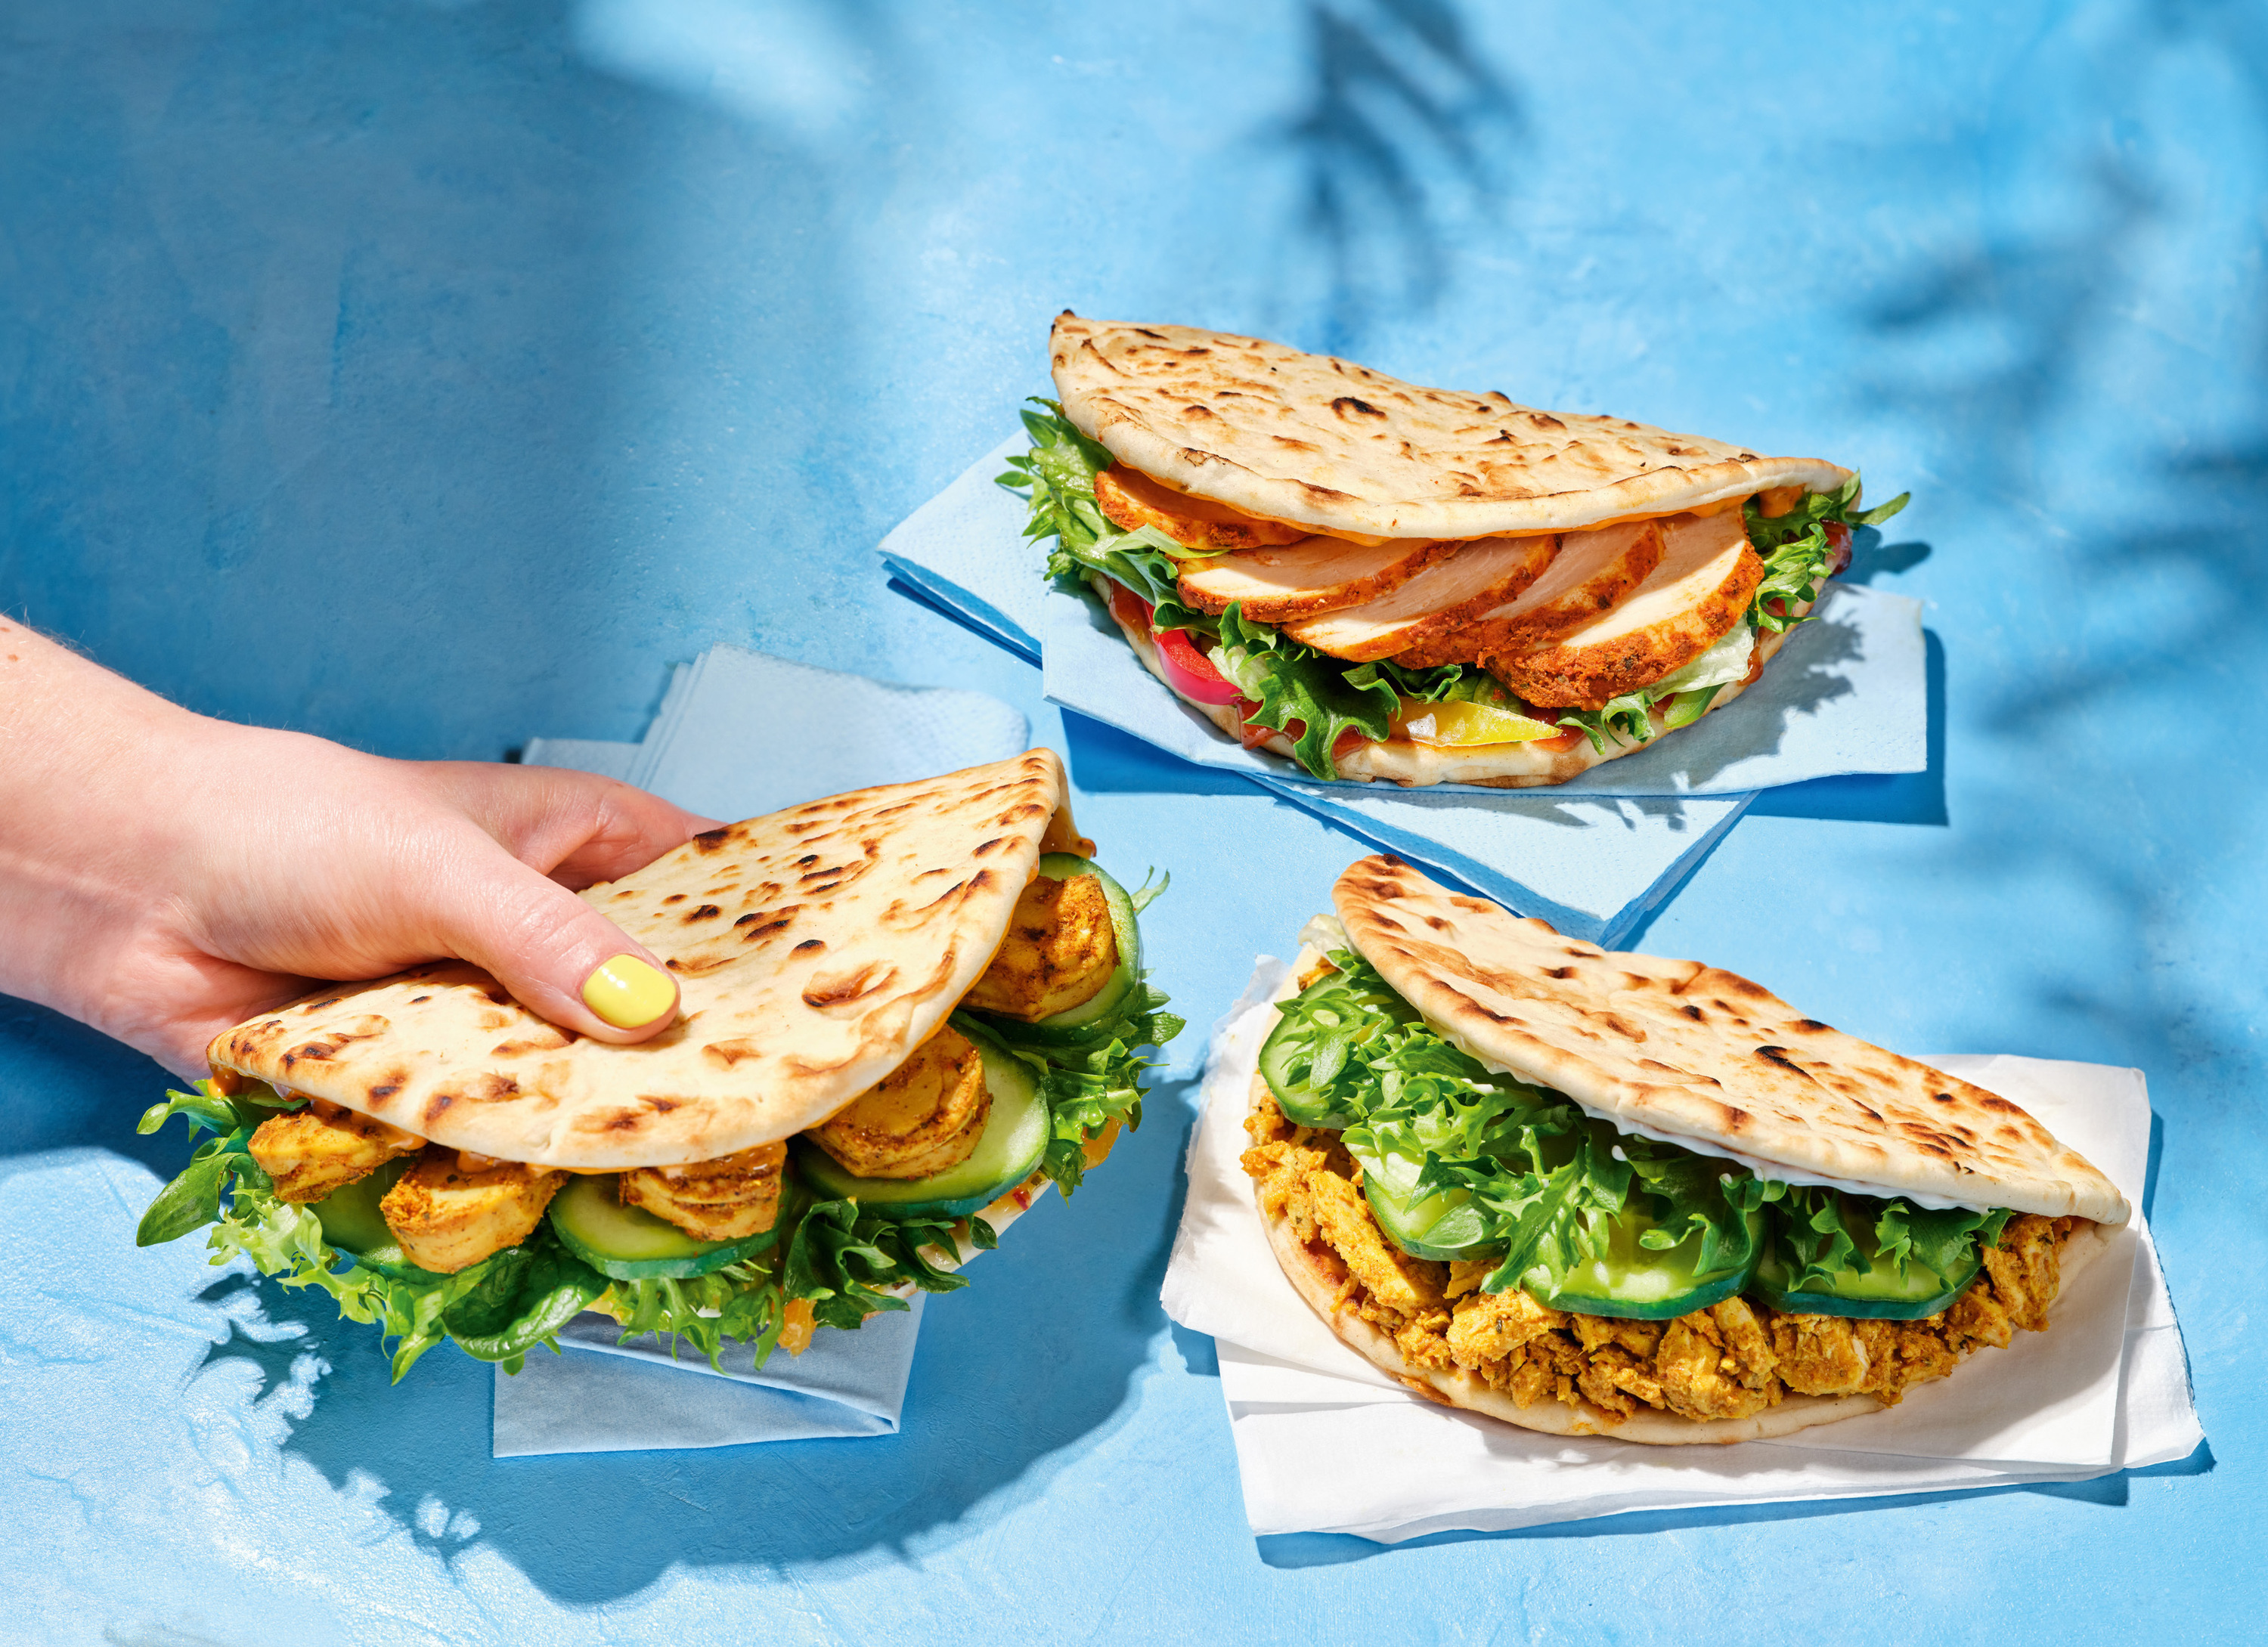 The Greggs summer menu just dropped. Here's what's new